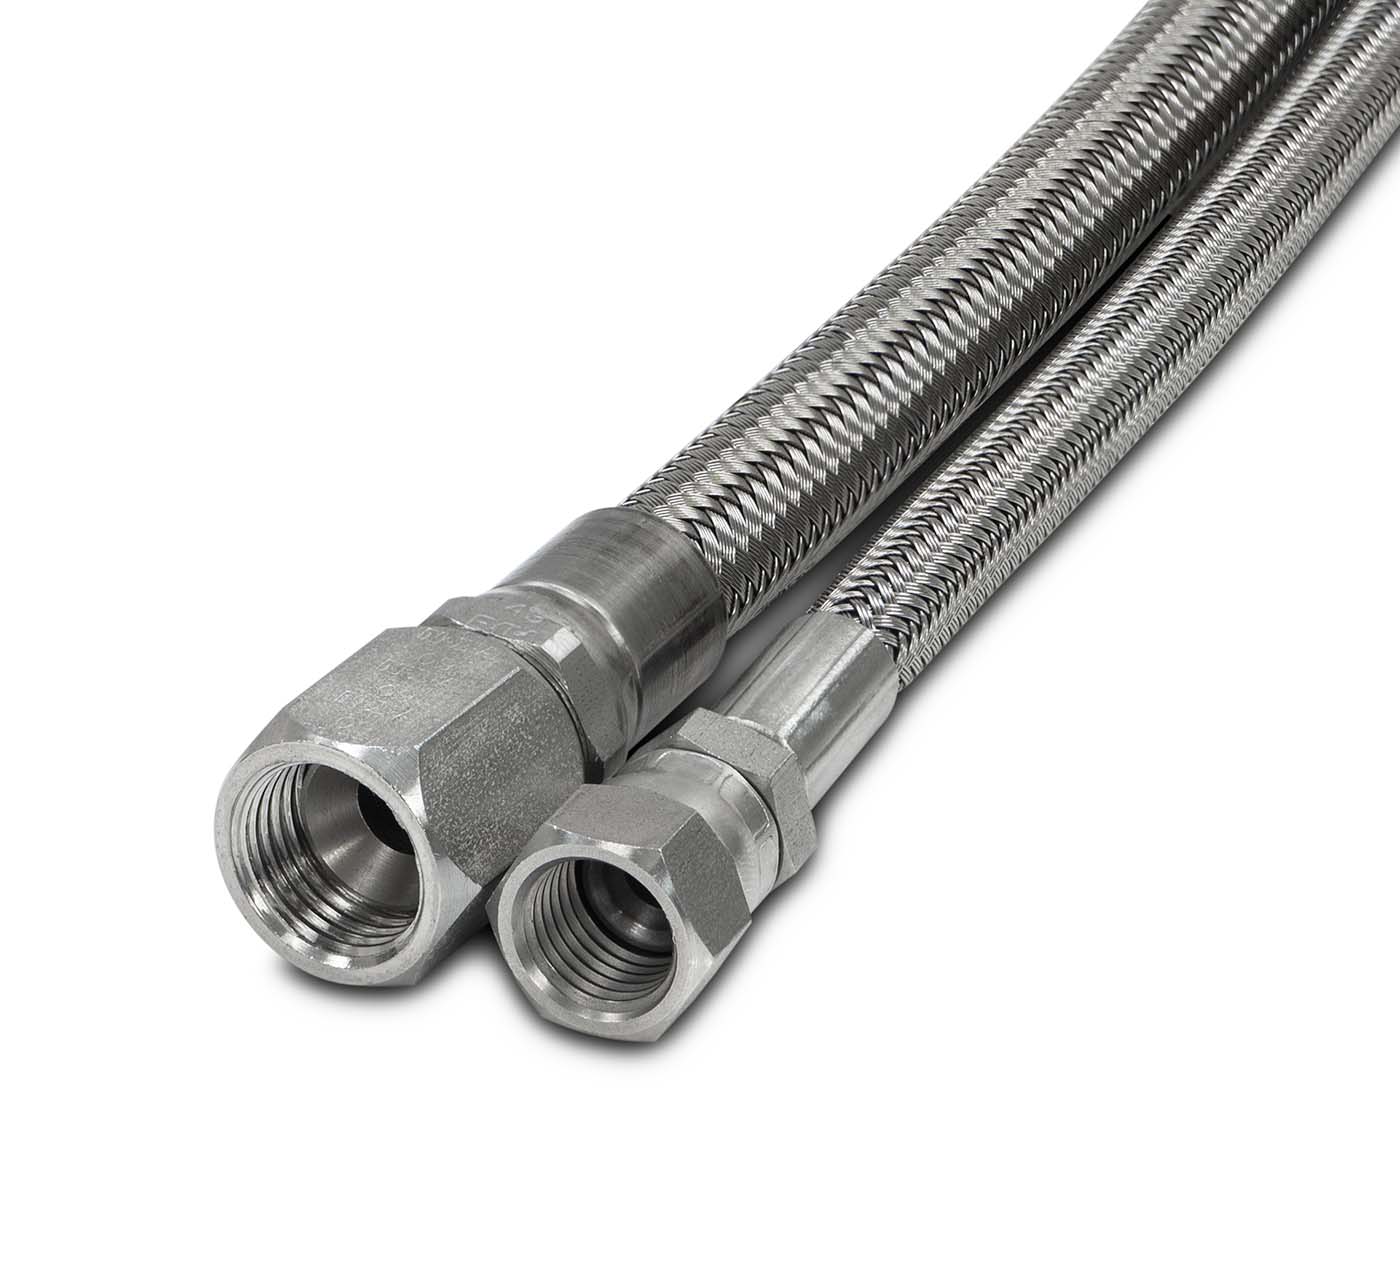 Teleflex USA High Pressure Smooth Bore PTFE Braided Stainless Steel Hose New Products Teleflex 